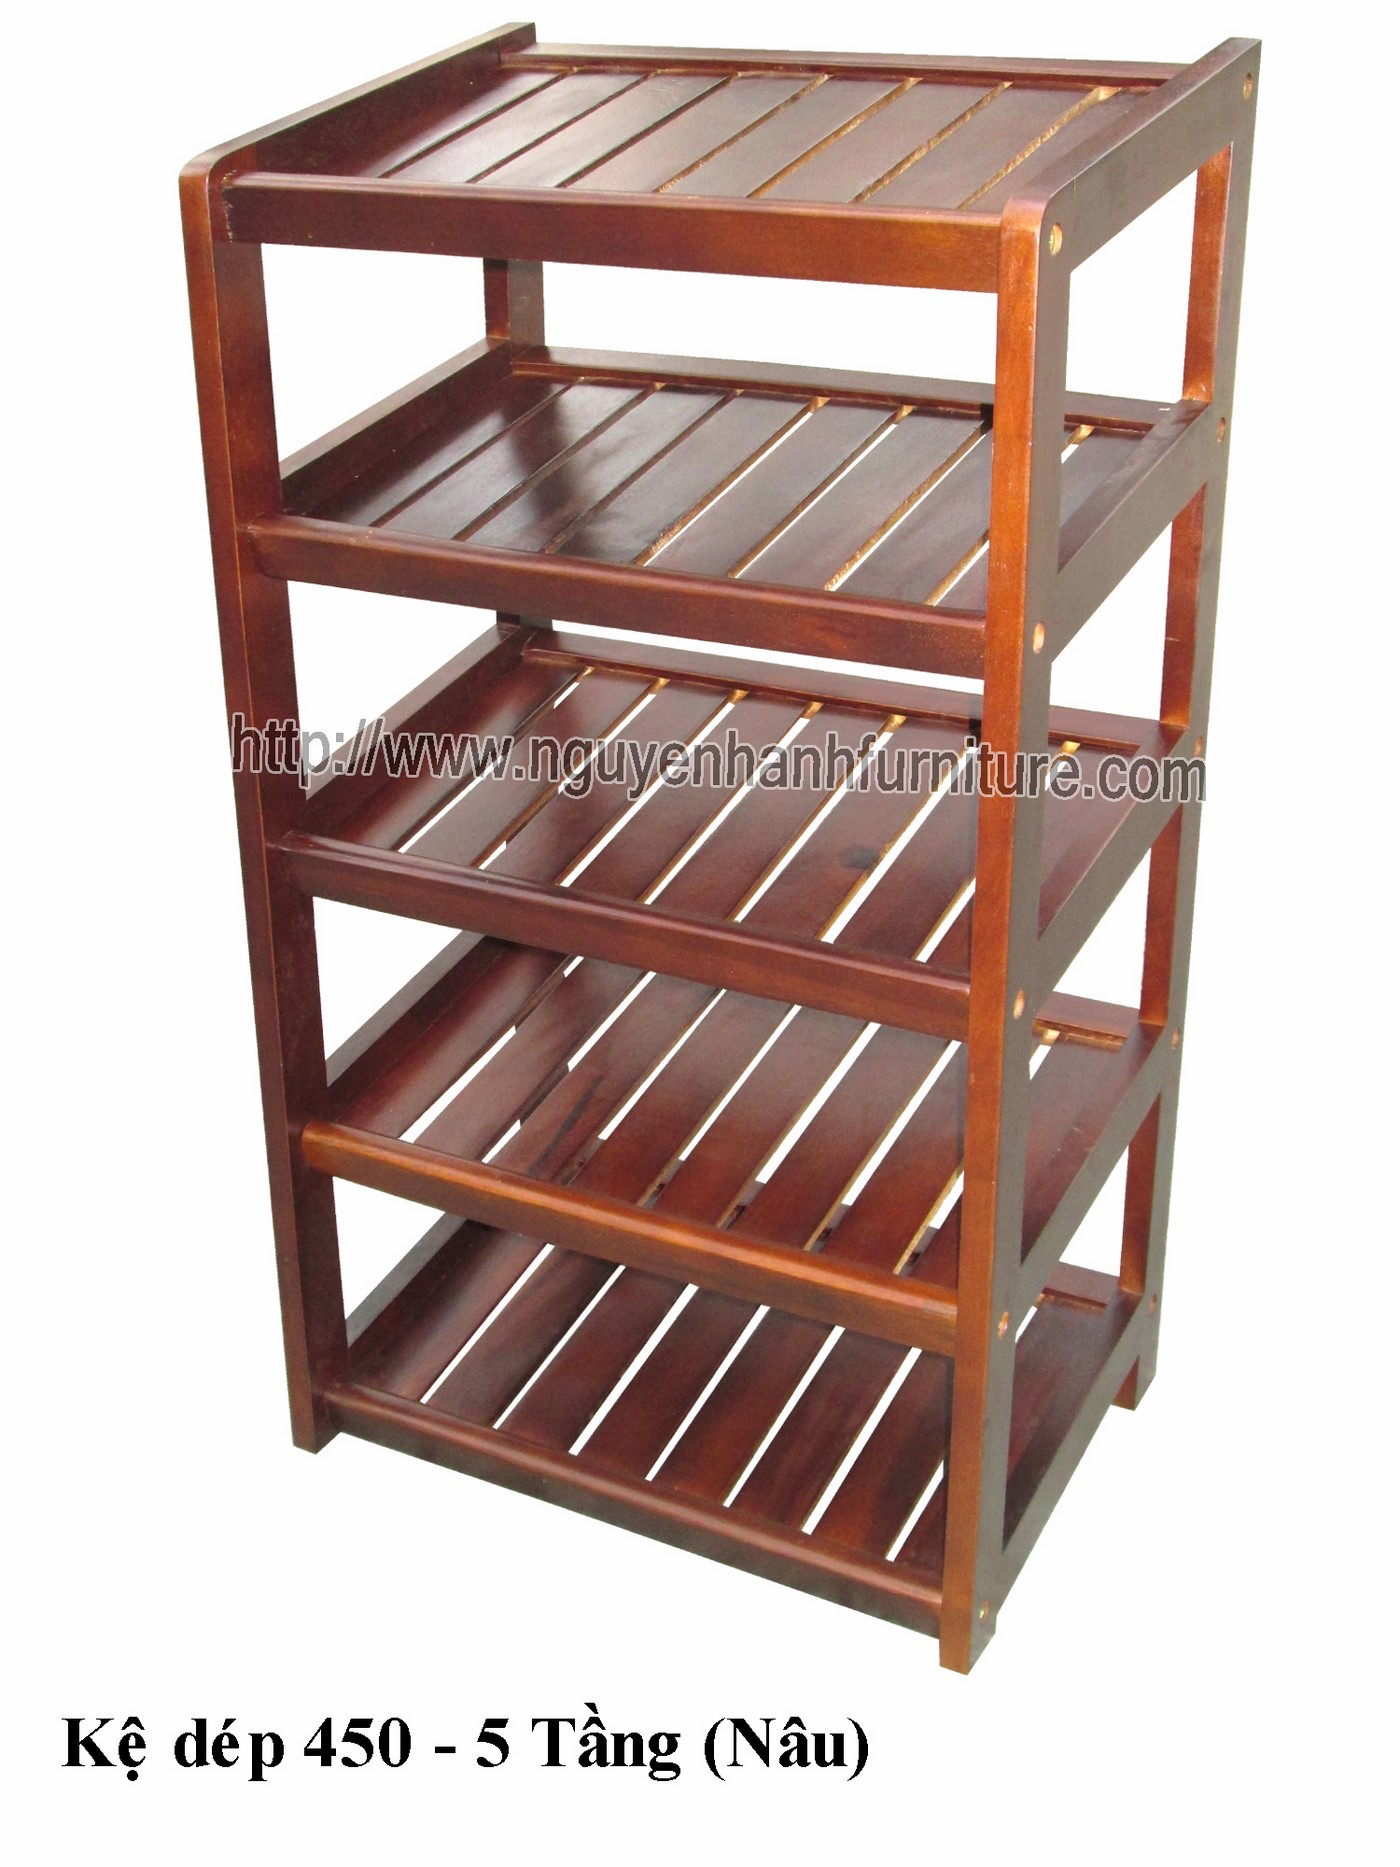 Name product: Shoeshelf 5 Floors 45 with sparse blades (Brown) - Dimensions: 45 x 30 x 82 (H) - Description: Wood natural rubber